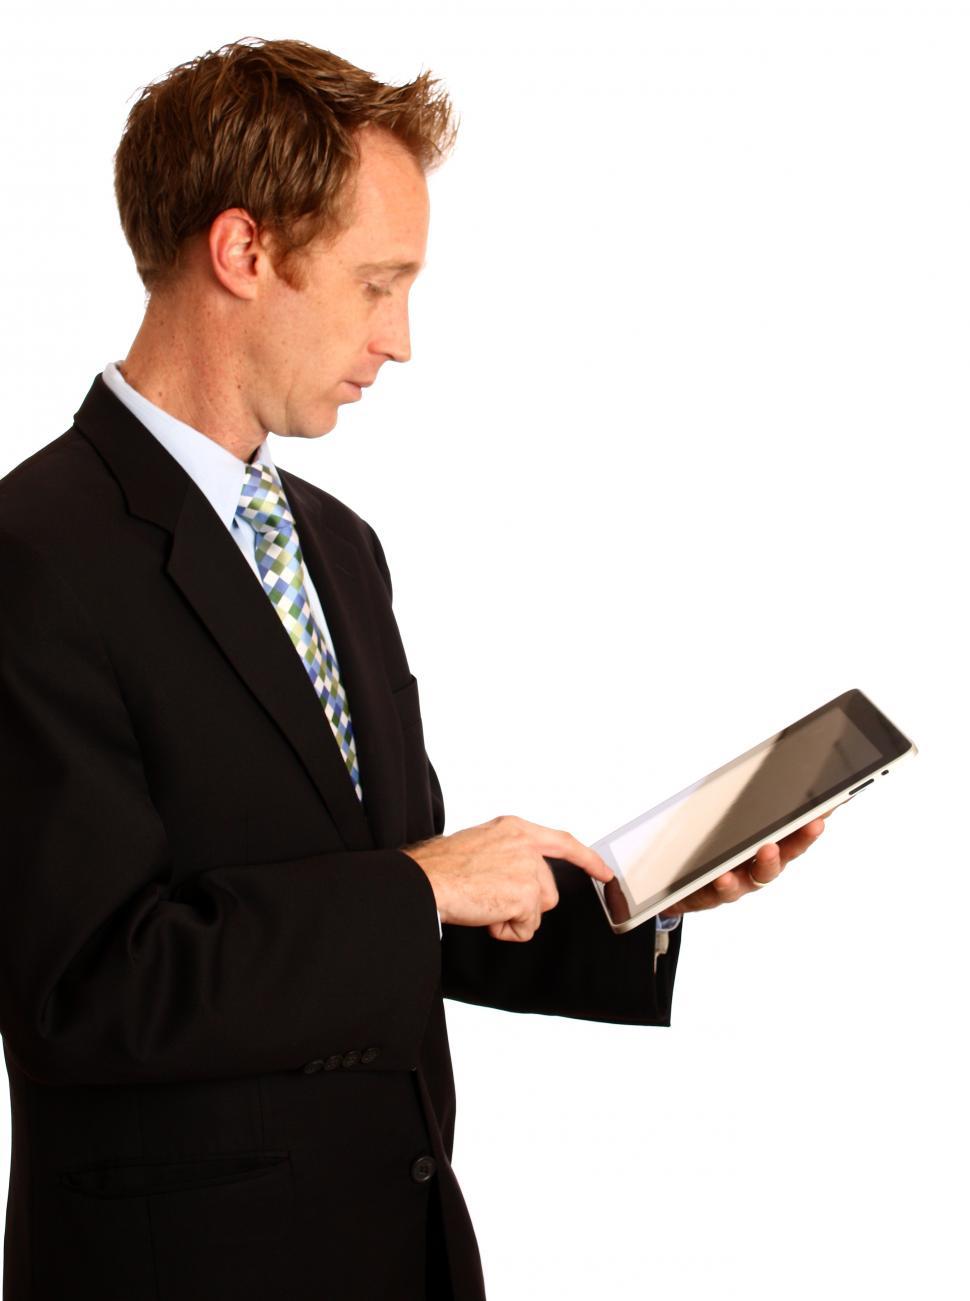 Free Image of A young businessman holding a tablet computer 